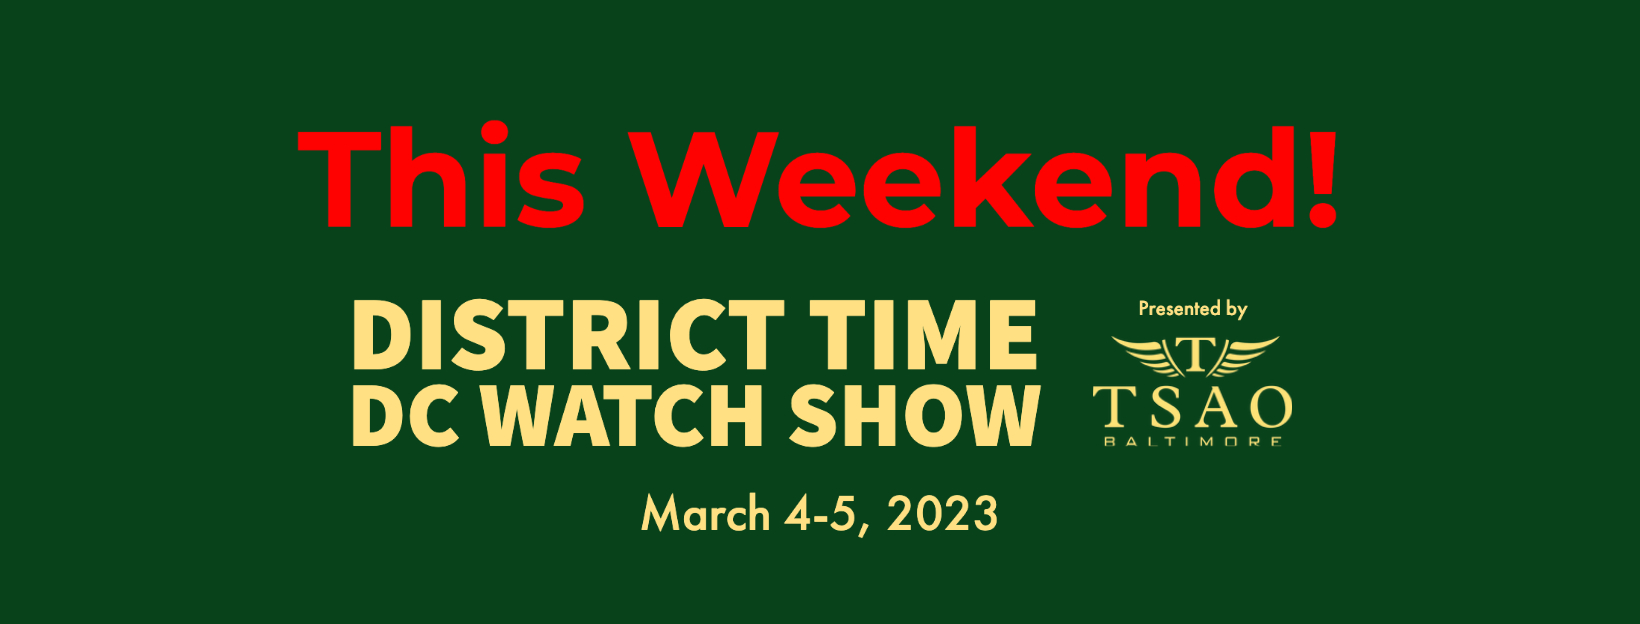 District Time 2023 - This Weekend!